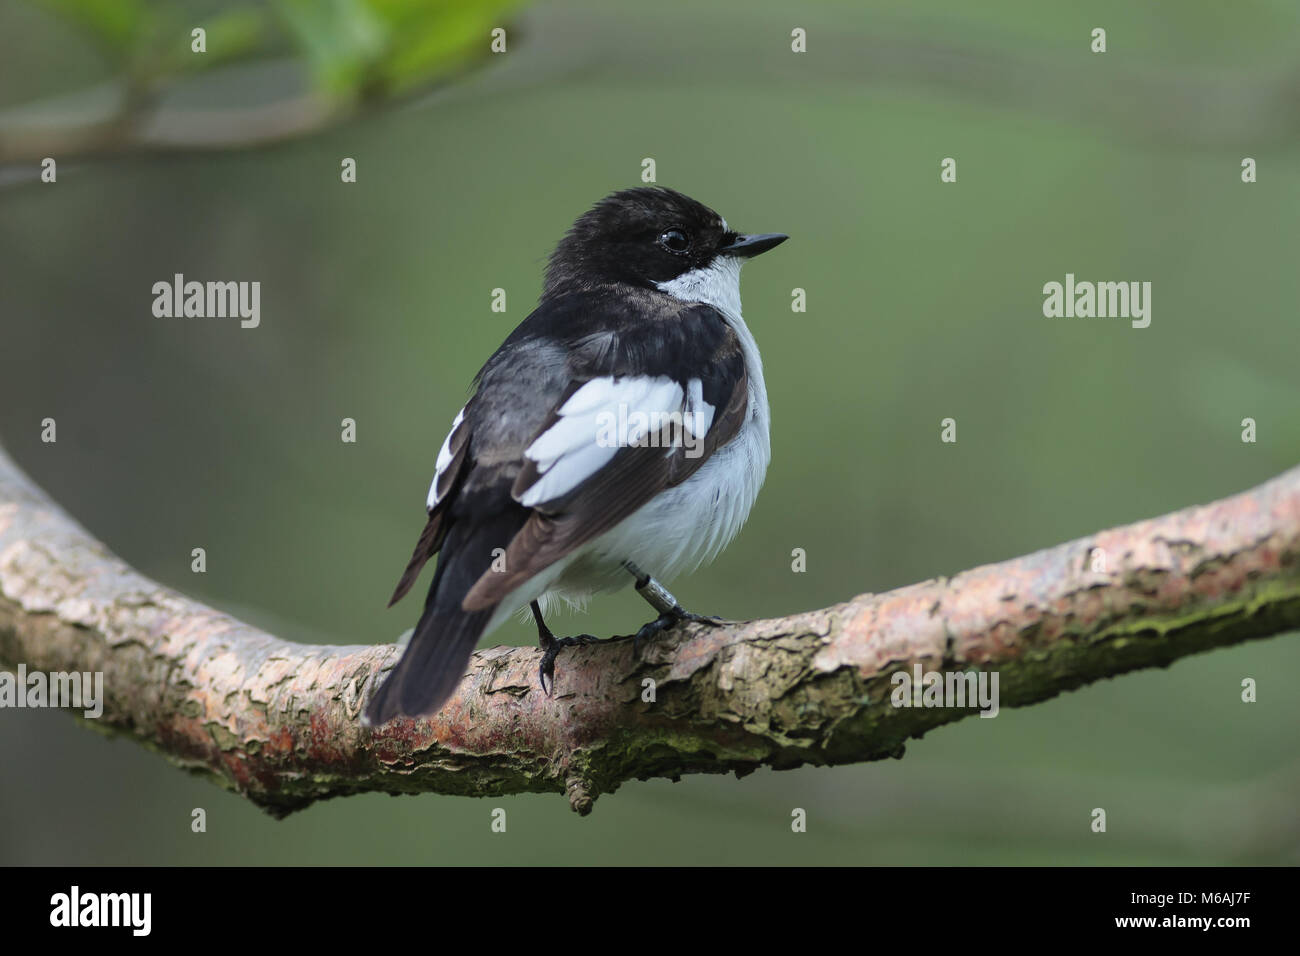 Male Pied Flycatcher, Ficedula hypoleuca, at Coombes Valley RSPB, UK Stock Photo